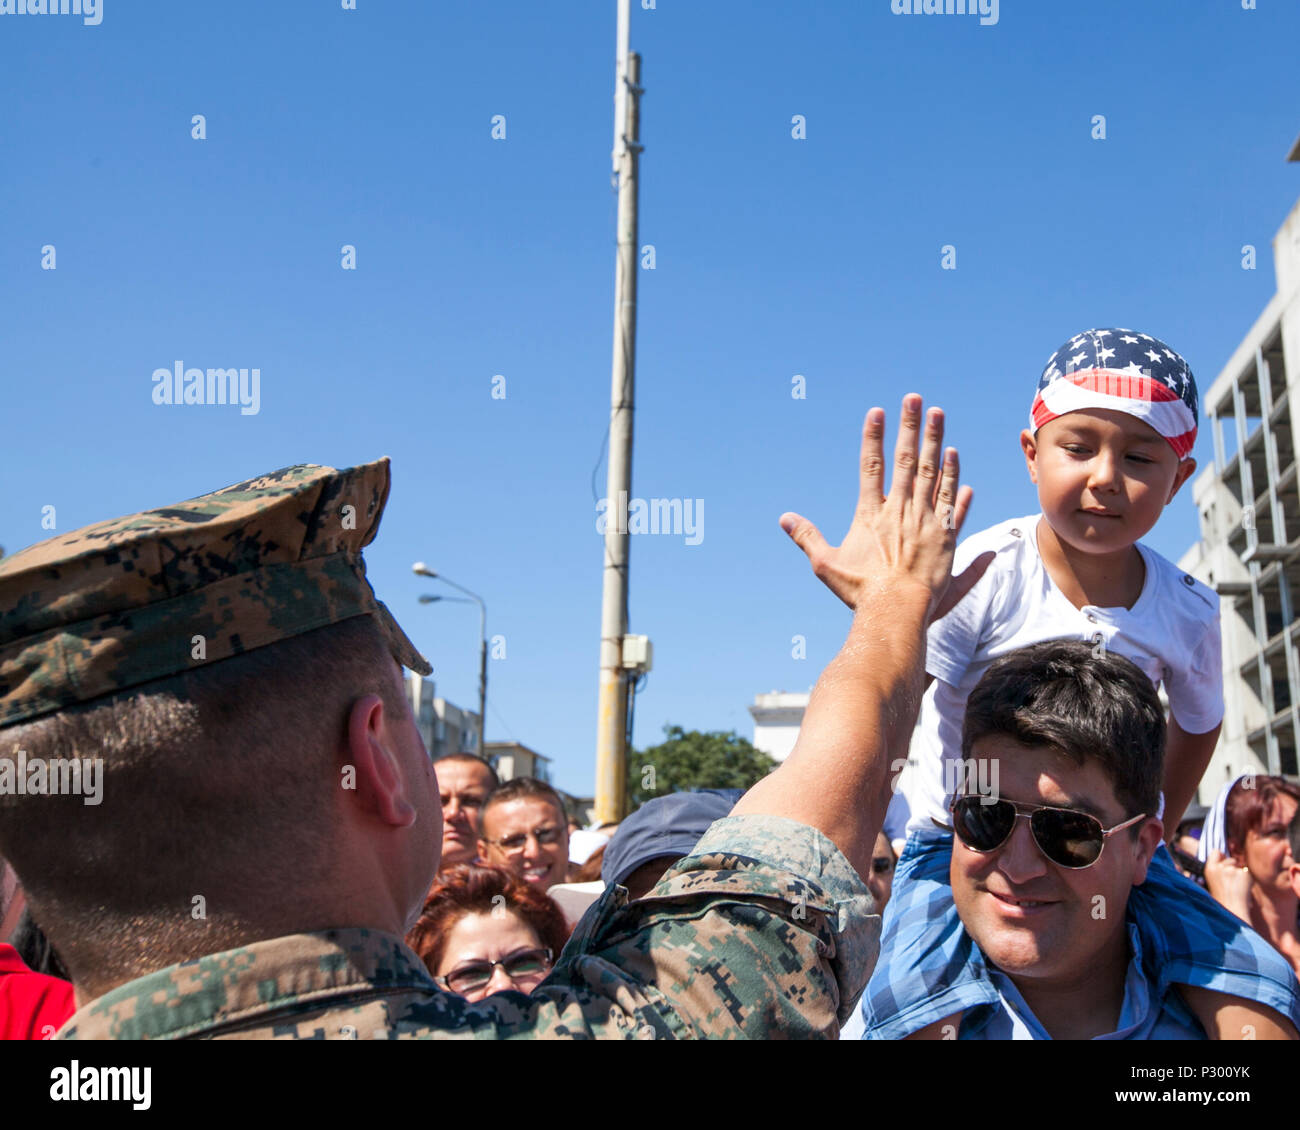 U.S. Marine Corps 1st Lt. Grant Peehler a Civil Affairs Team Leader with the Black Sea Rotational Force, spots an American Flag bandanna during the Romanian Navy Day in Constanța, Romania, Aug. 15, 2016. U.S. Sailors and Marines supporting the Black Sea Rotational Force 16.2 helped pay tribute to the prestigious history of the Romanian navy and highlighted the military’s movement toward new developments and modernizations. Black Sea Rotational Force is an annual multilateral security cooperation activity between the U.S. Marine Corps and partner nations in the Black Sea, Balkan and Caucasus r Stock Photo